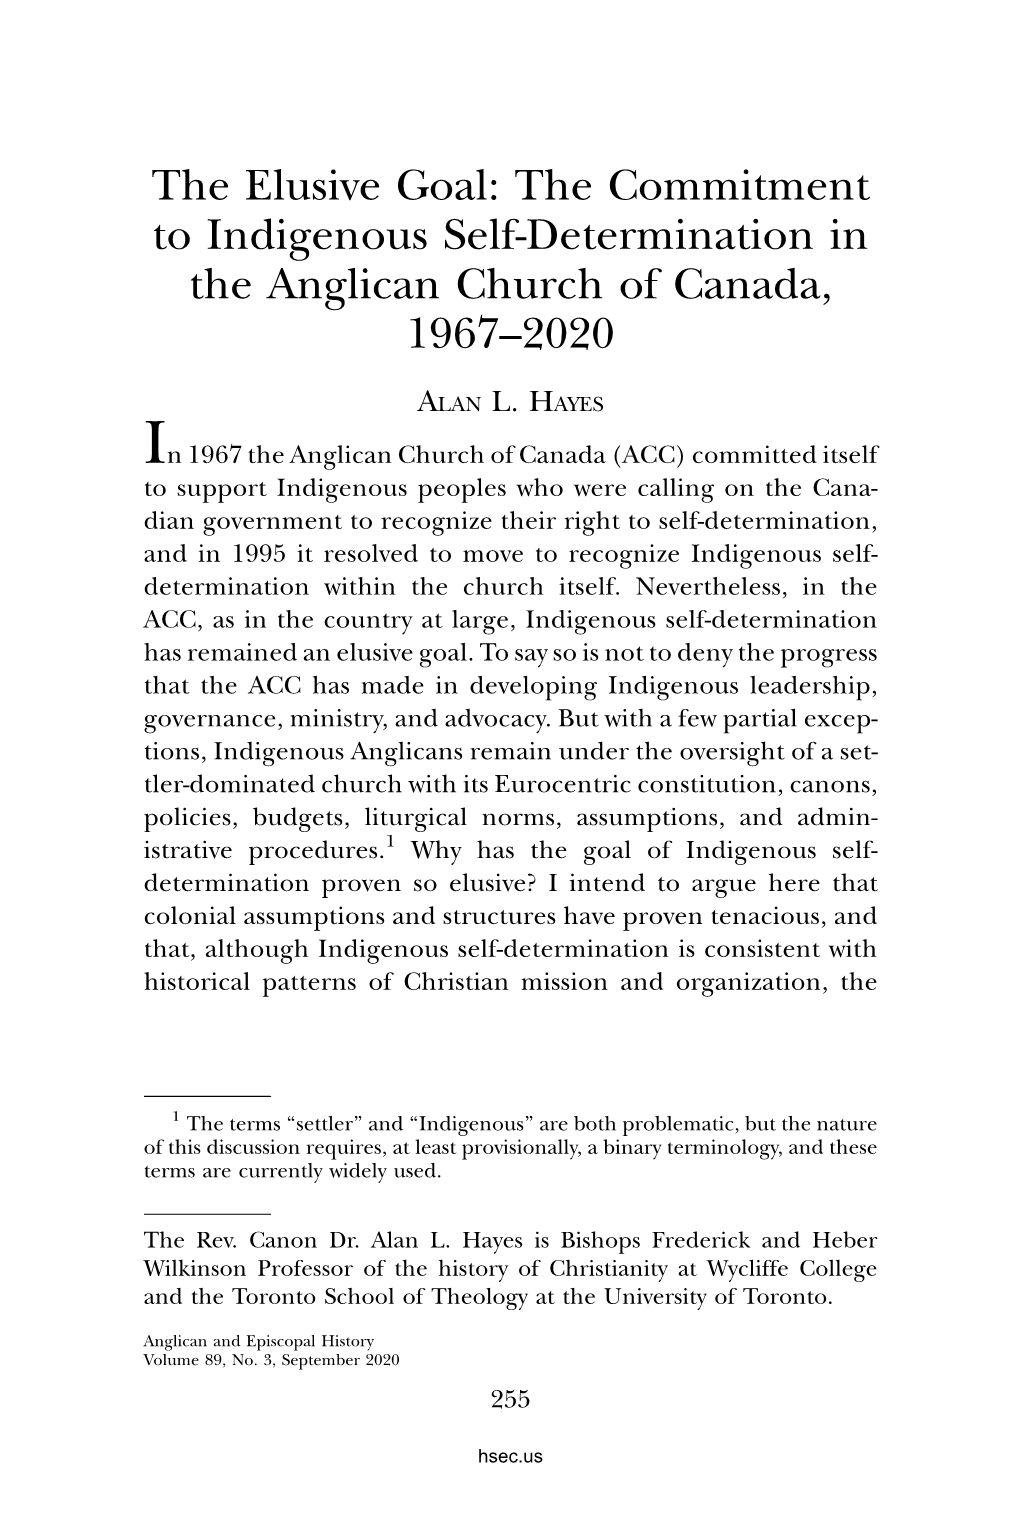 The Commitment to Indigenous Self-Determination in the Anglican Church of Canada, 1967–2020